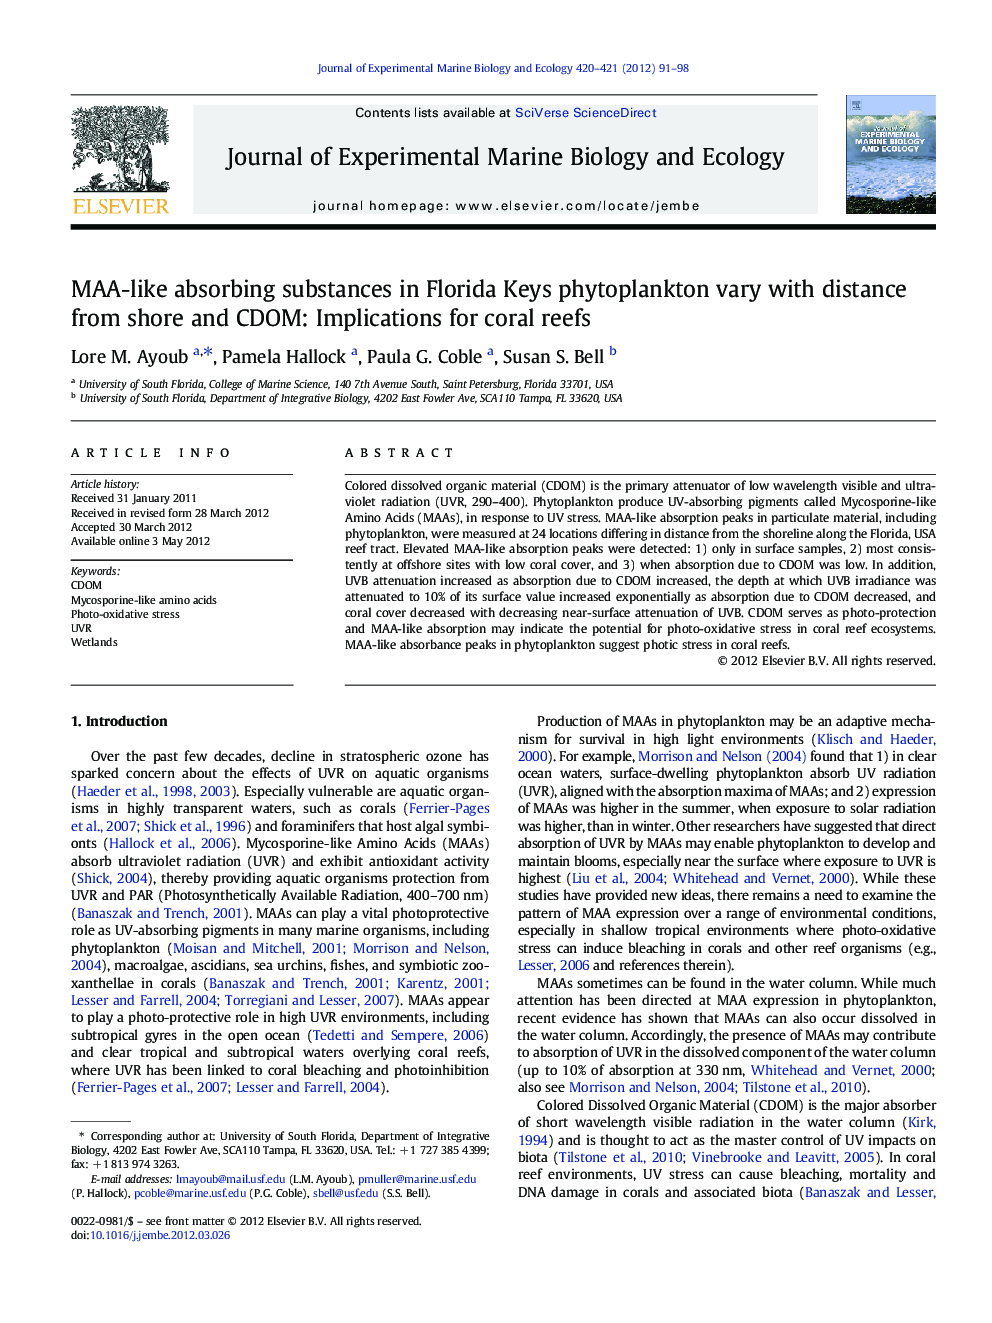 MAA-like absorbing substances in Florida Keys phytoplankton vary with distance from shore and CDOM: Implications for coral reefs